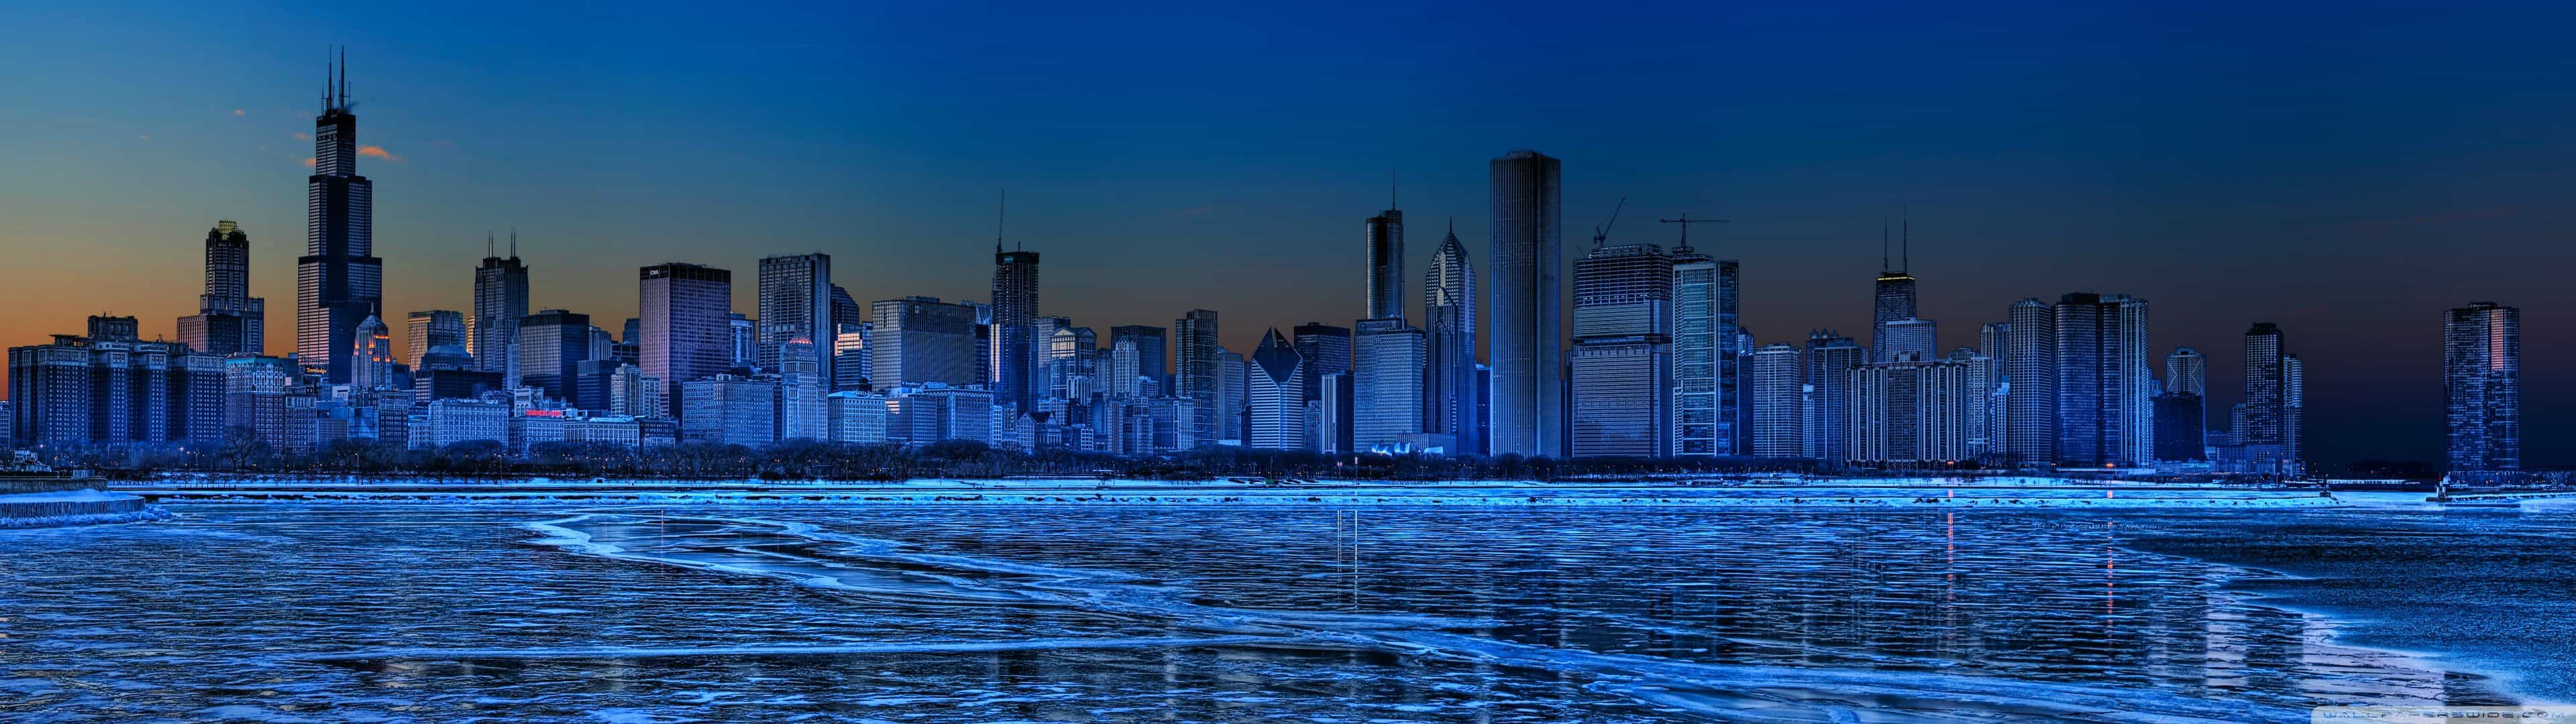 Chicago Skyline Triple Monitor Wallpapers